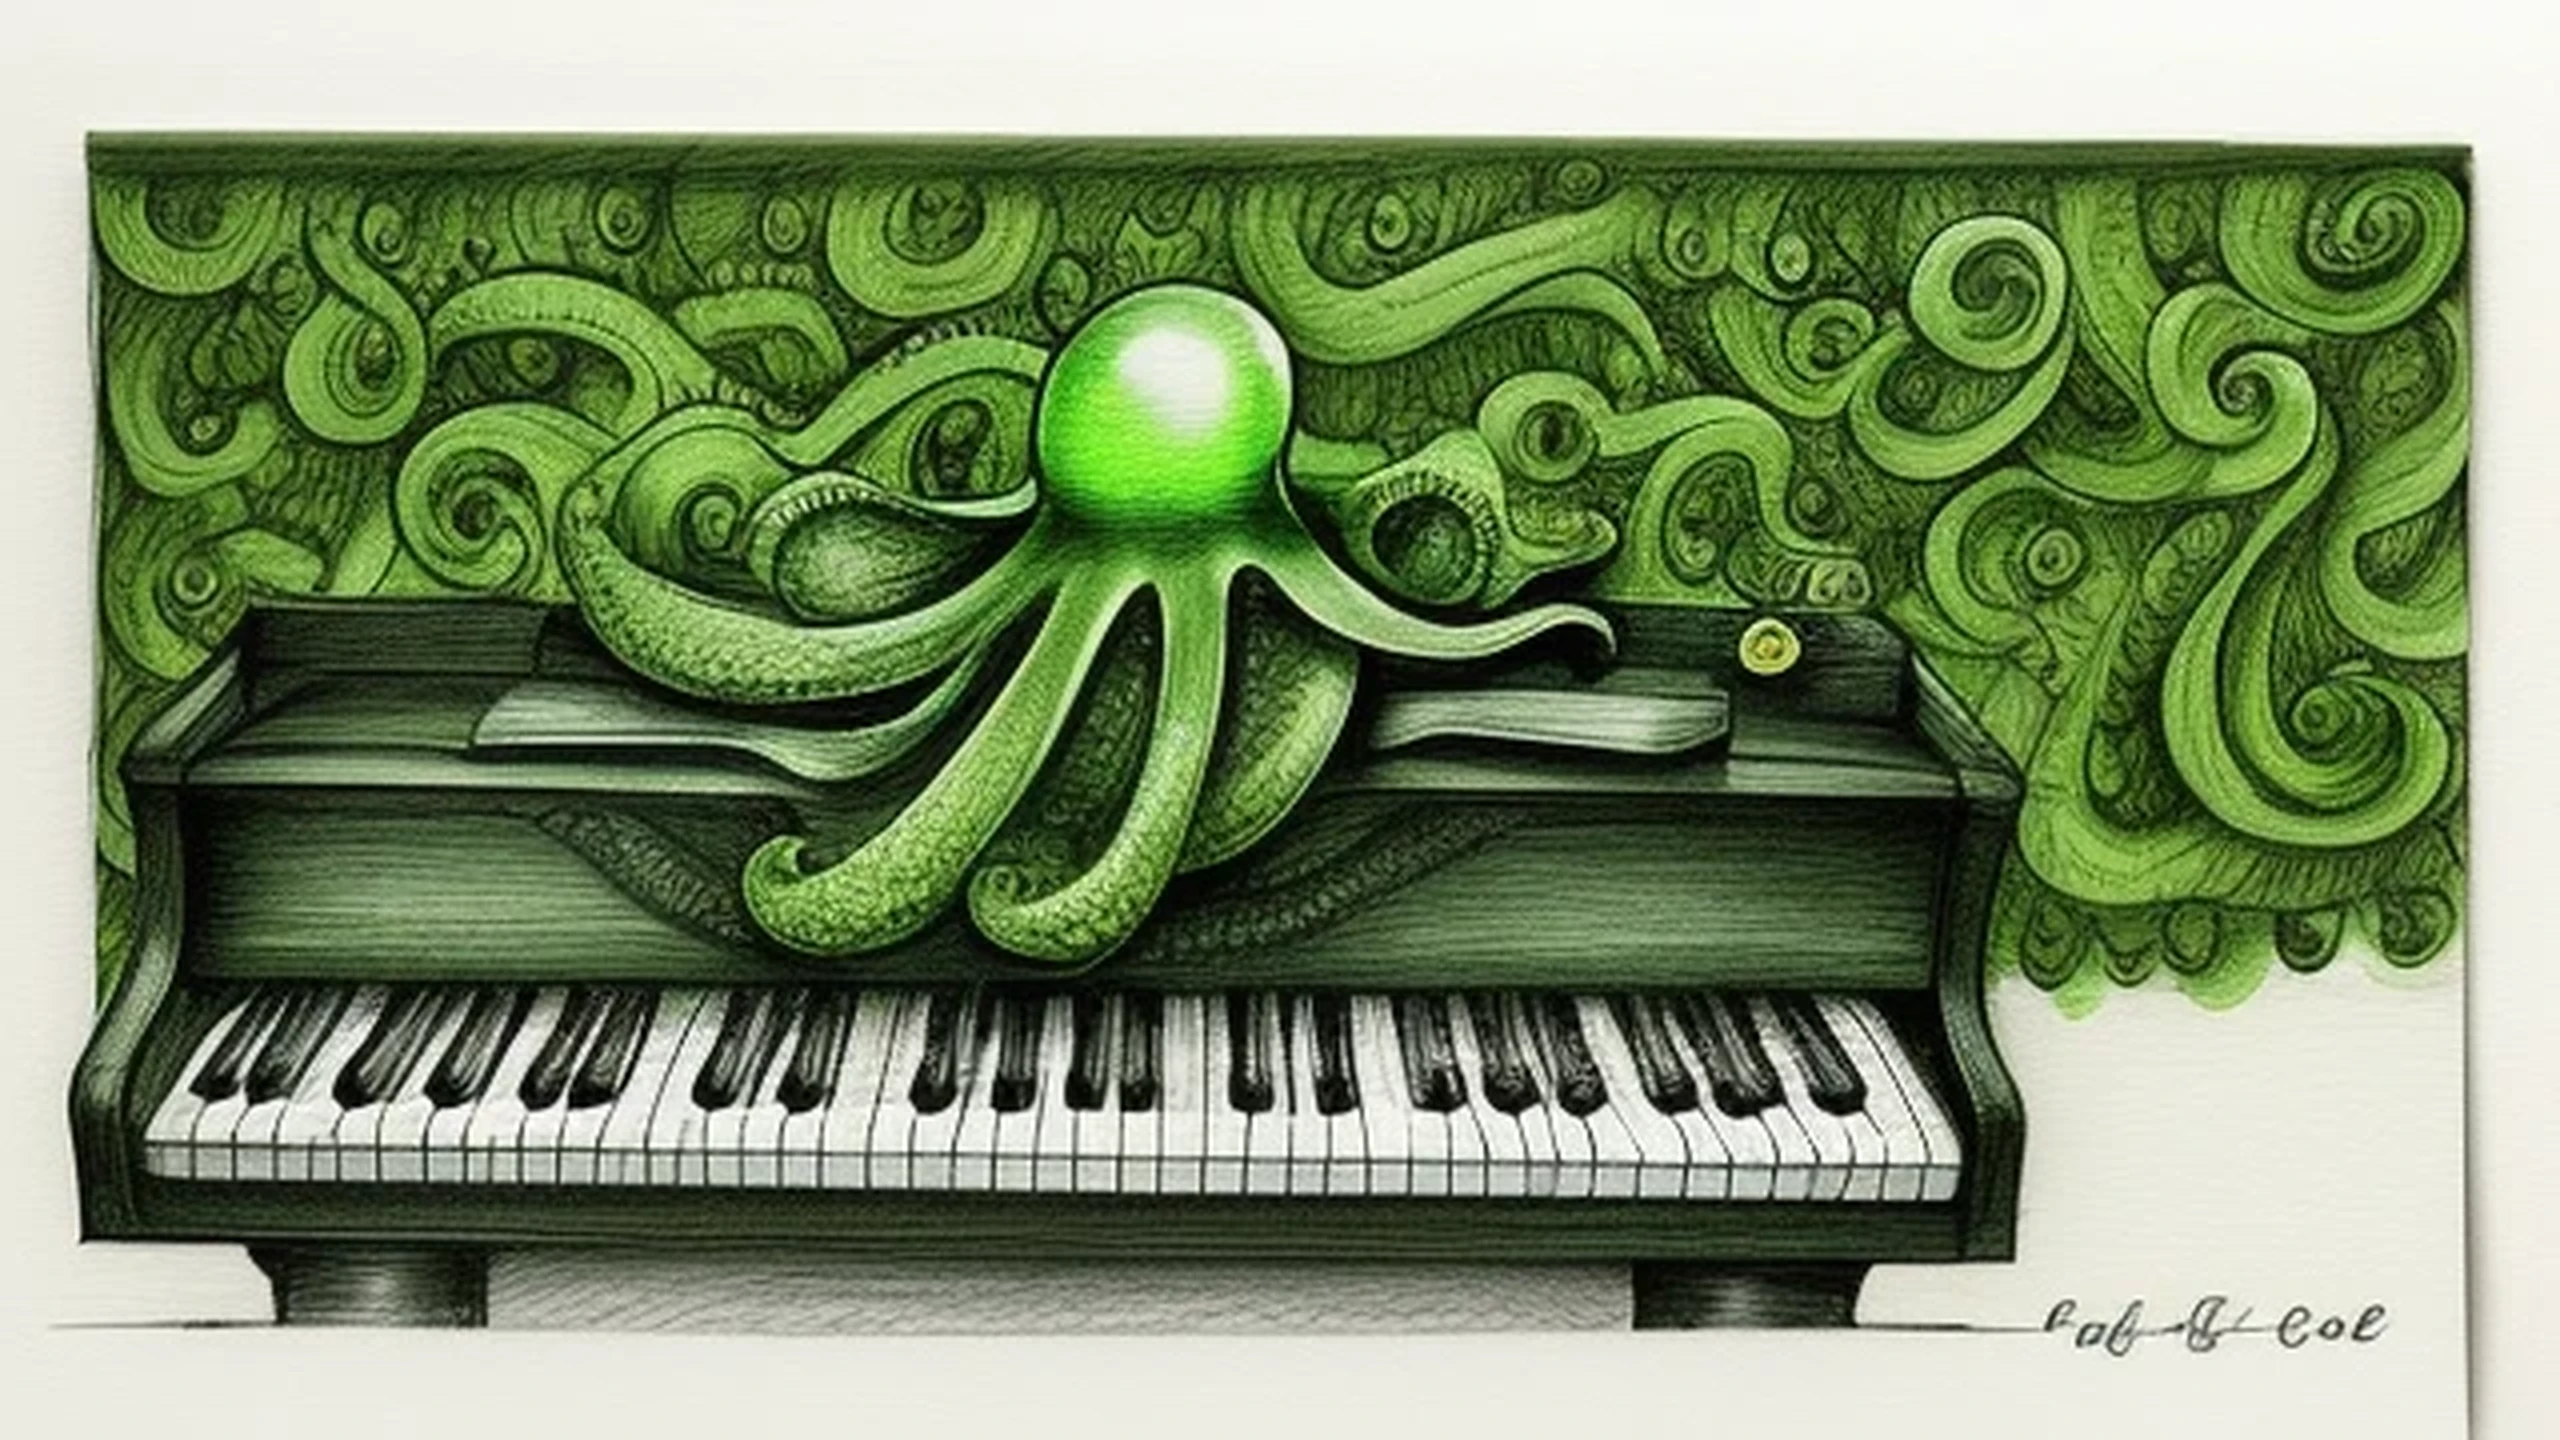 A green octopus plays piano.